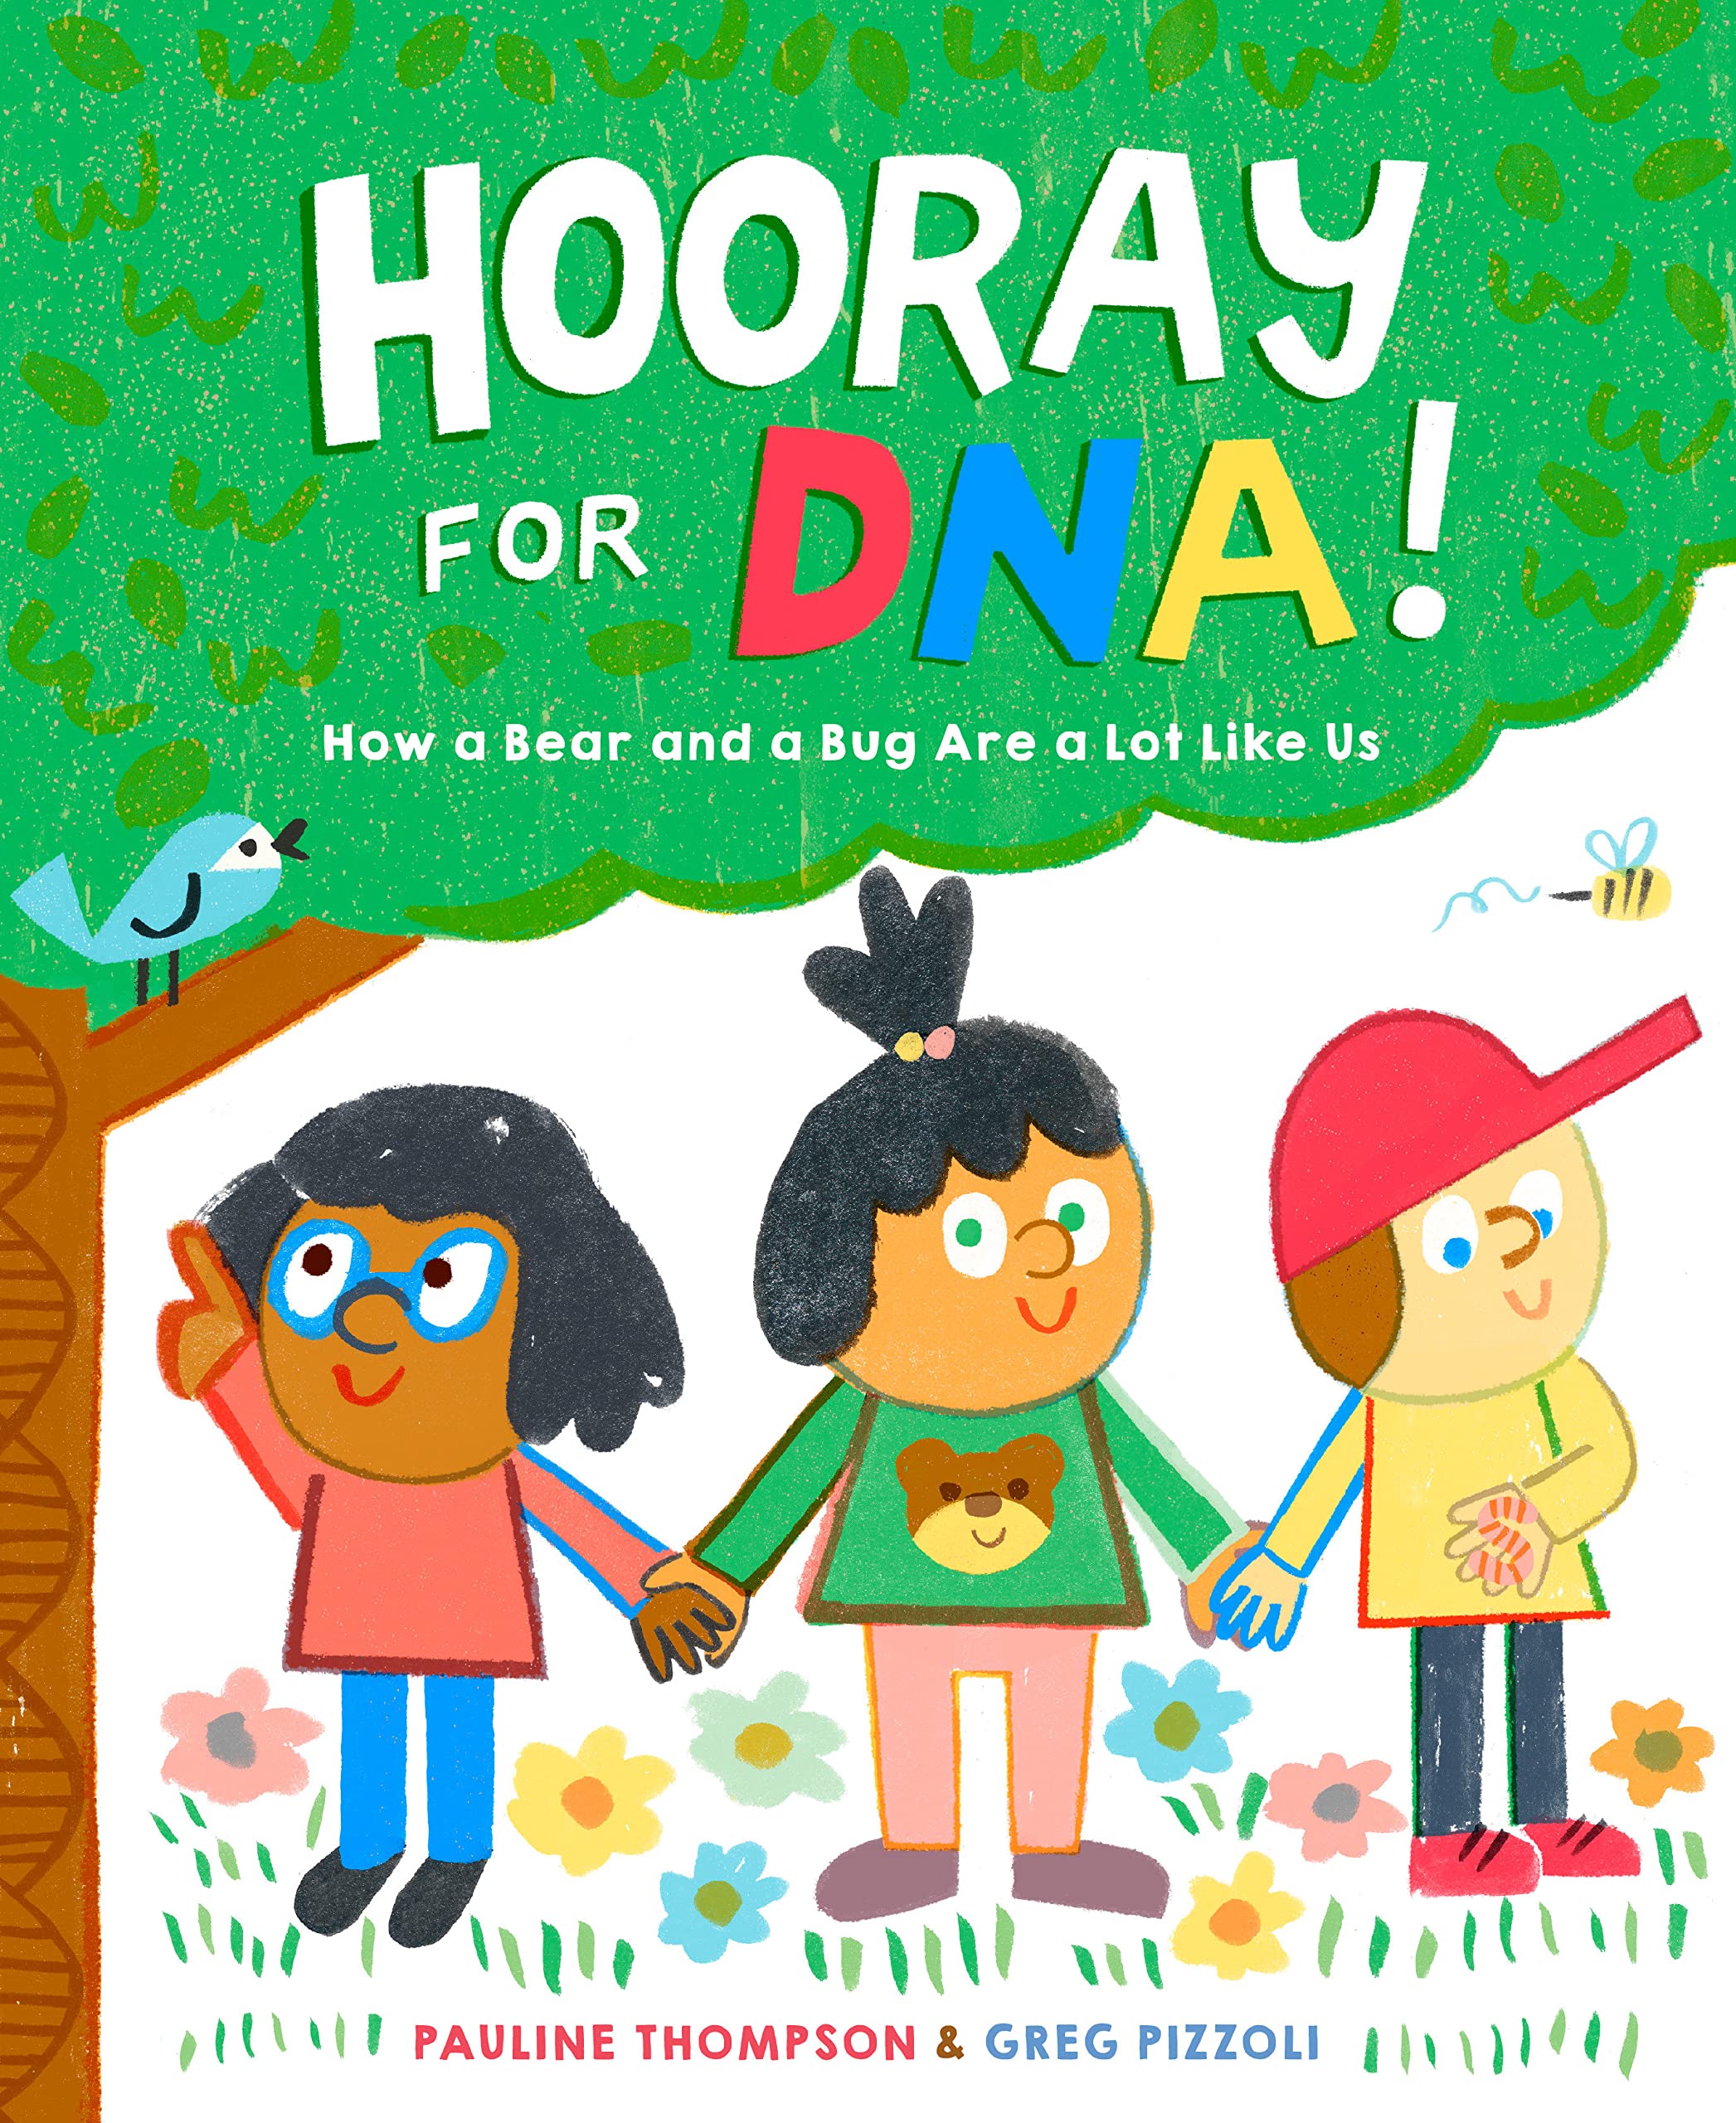 Hooray for DNA!: How a Bear and a Bug Are a Lot Like Us